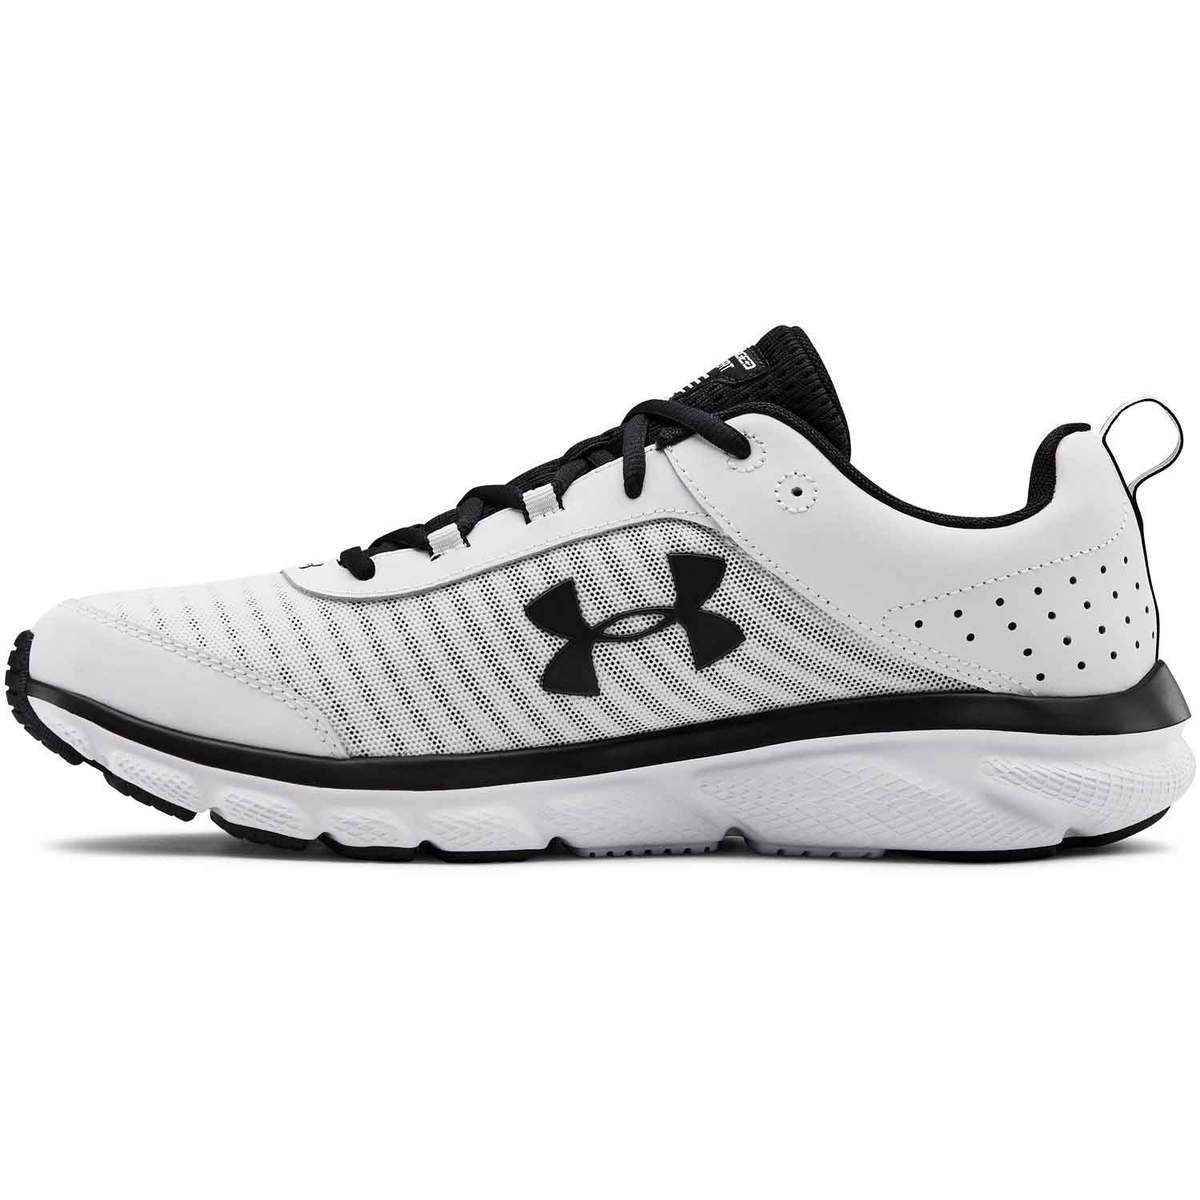 Under Armour Men's Charged Assert 8 Running Shoes - White - Size 10 ...